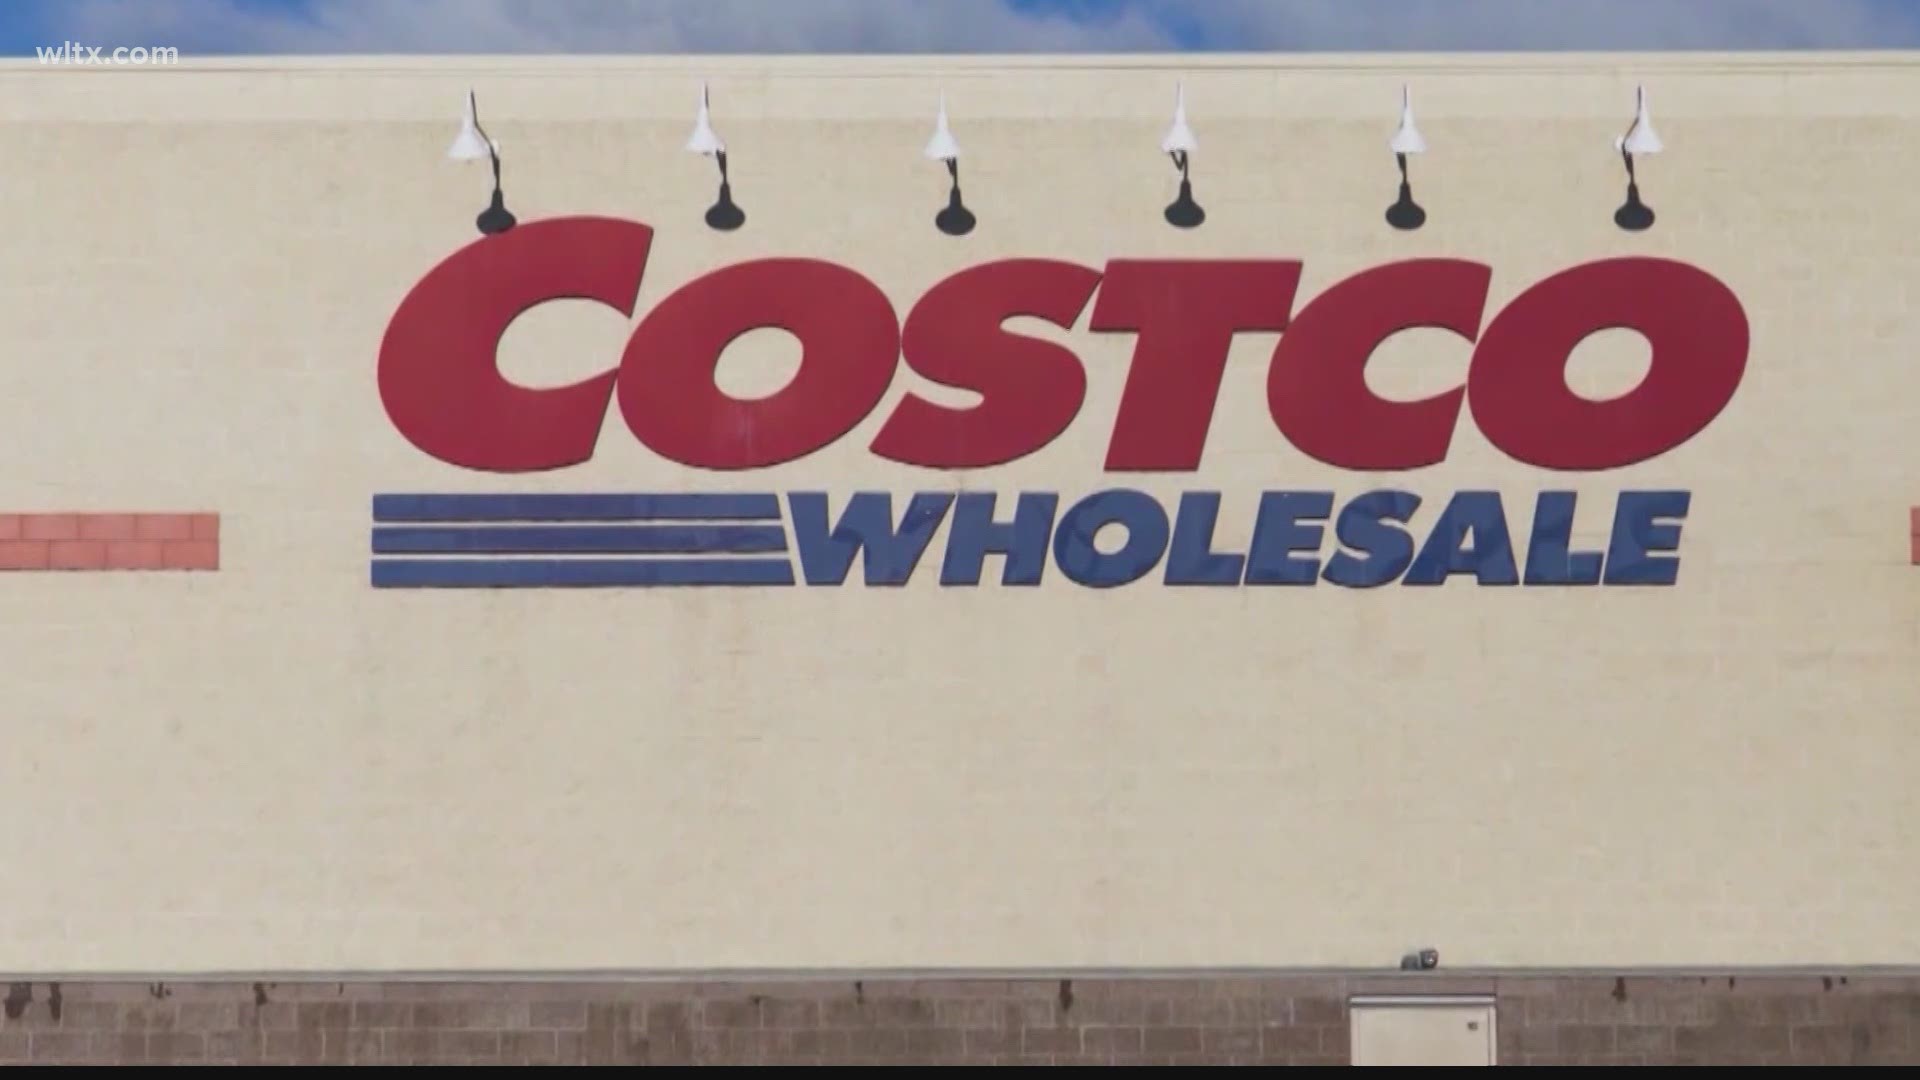 During the pandemic, Costco had early morning hours for older shoppers, that will end on July 26